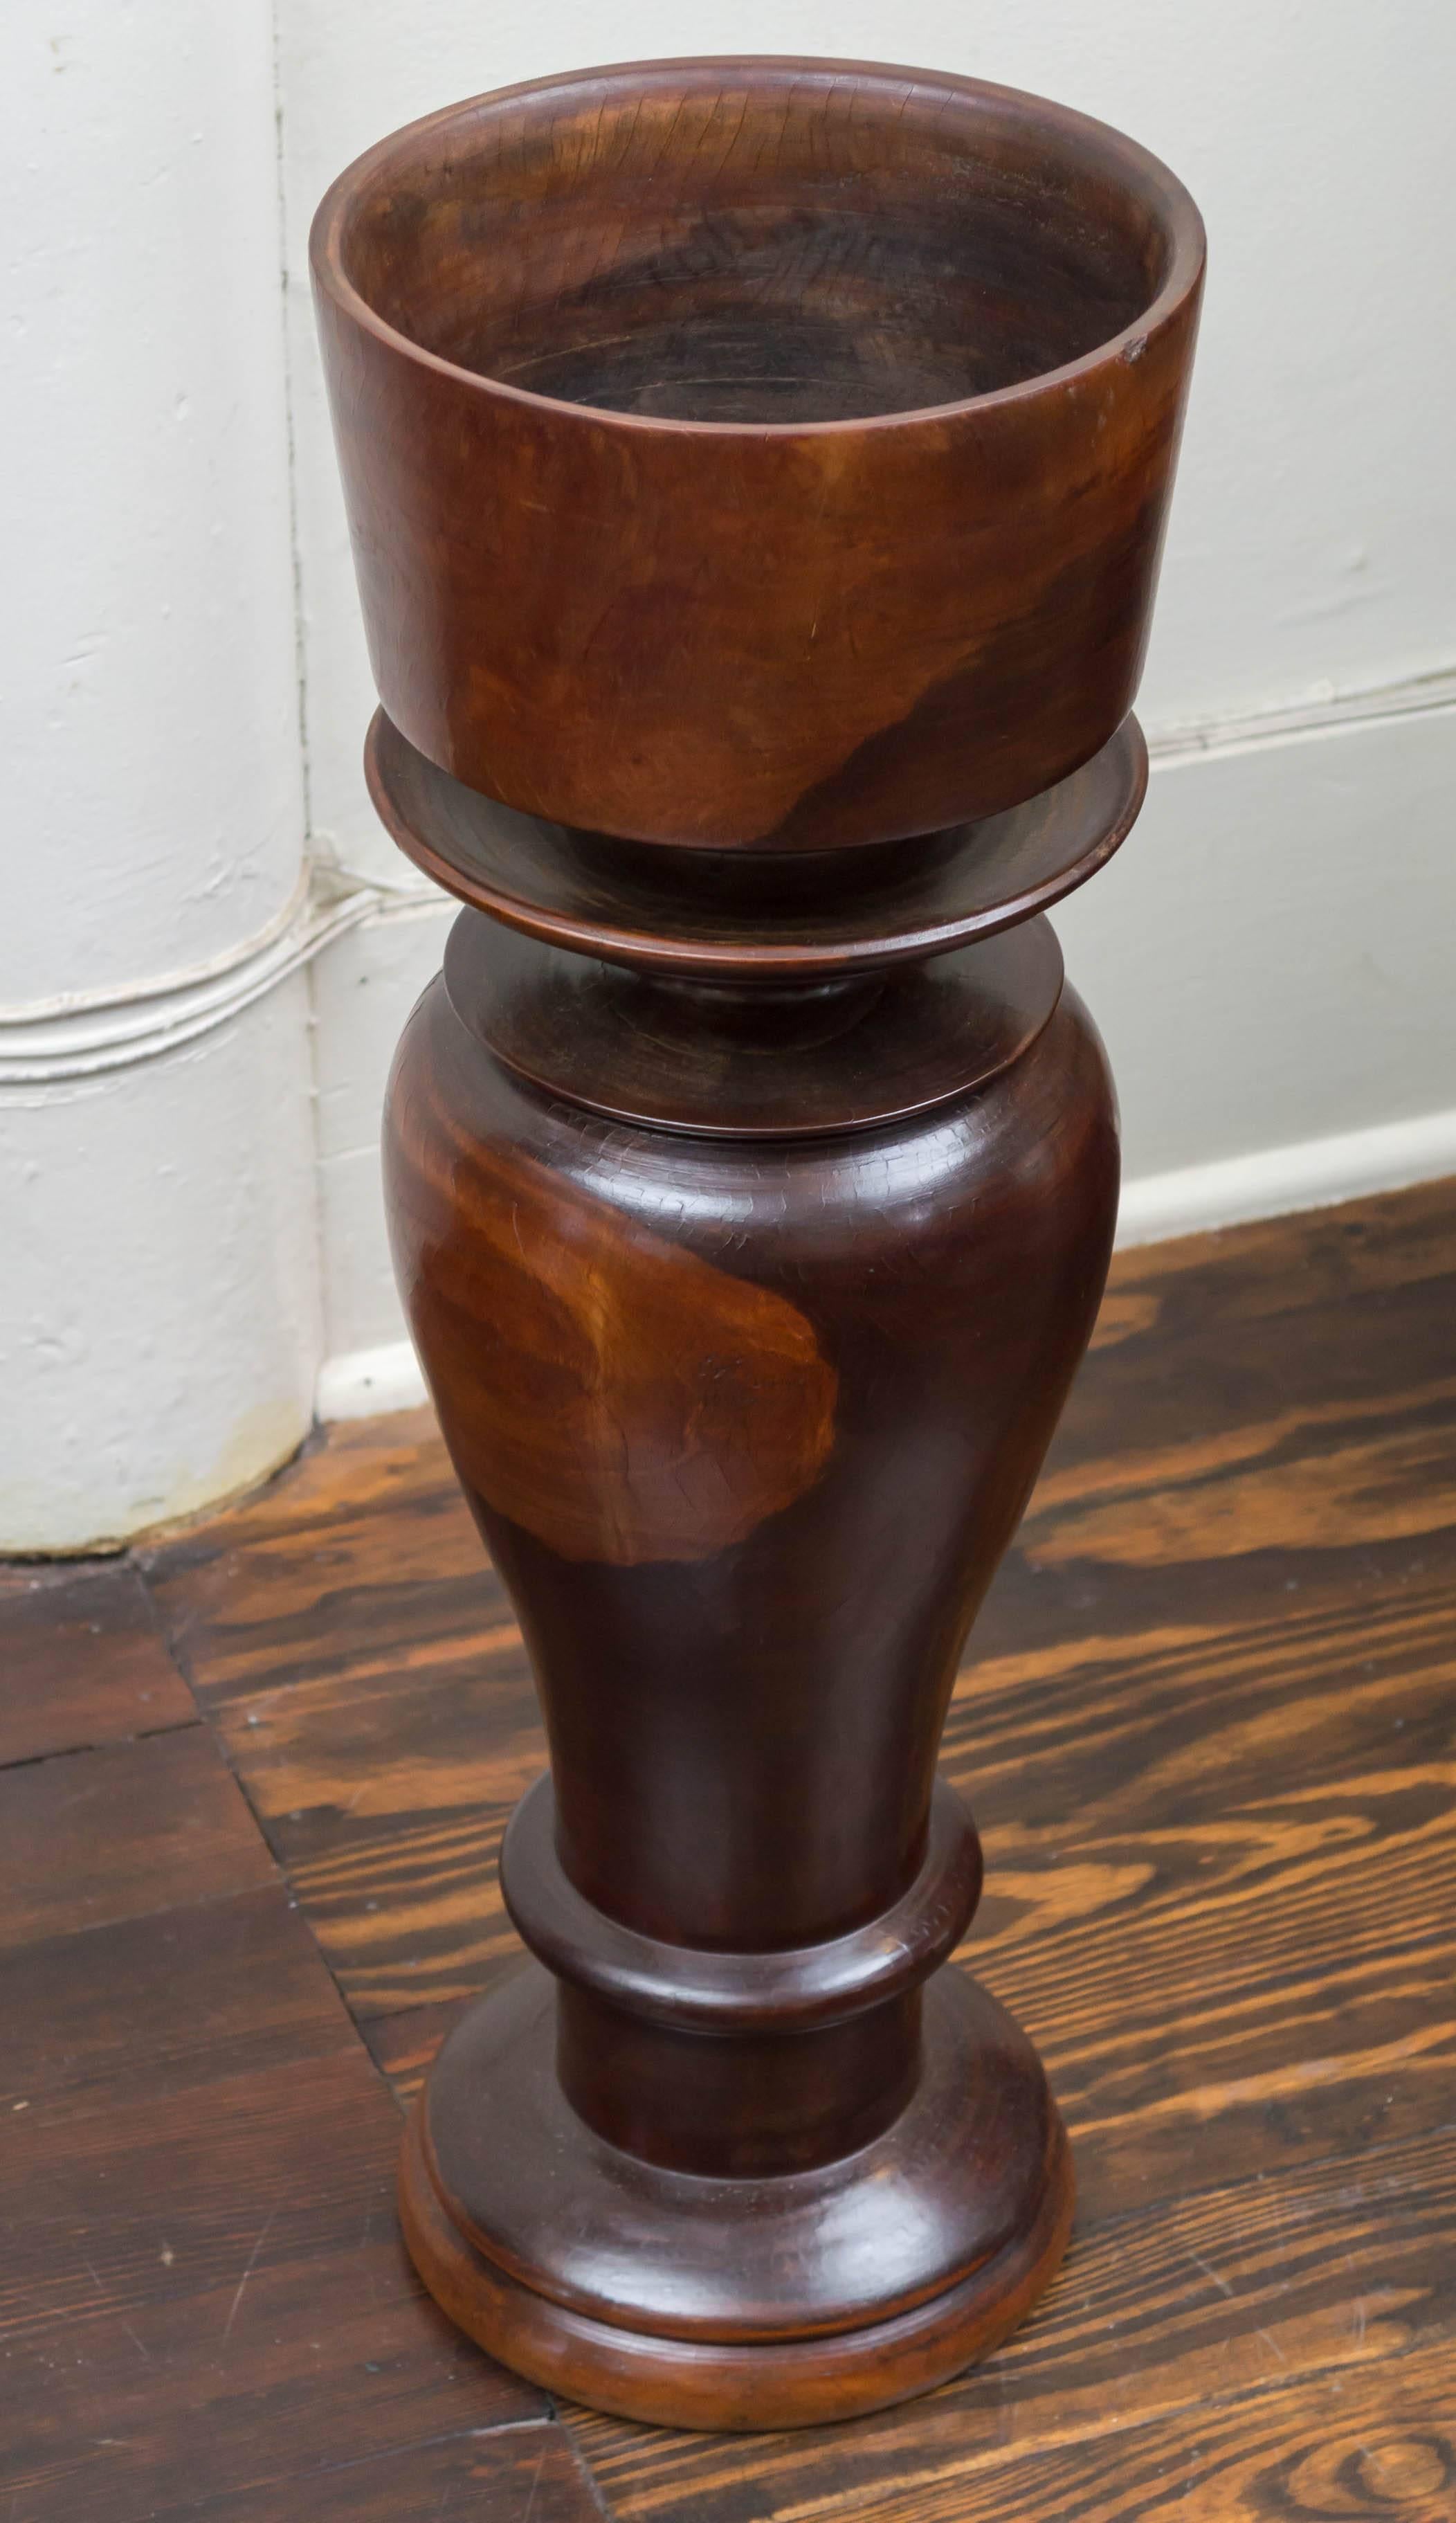 Late 19th Century Anglo Indian, massive baluster turned, lignum-vitae pot pourri stand. Circa 1880.
Lignum-vitae ( iron wood ) is massively dense and the hardest wood known. It has a striking contrasting figured pattern. These vessels were